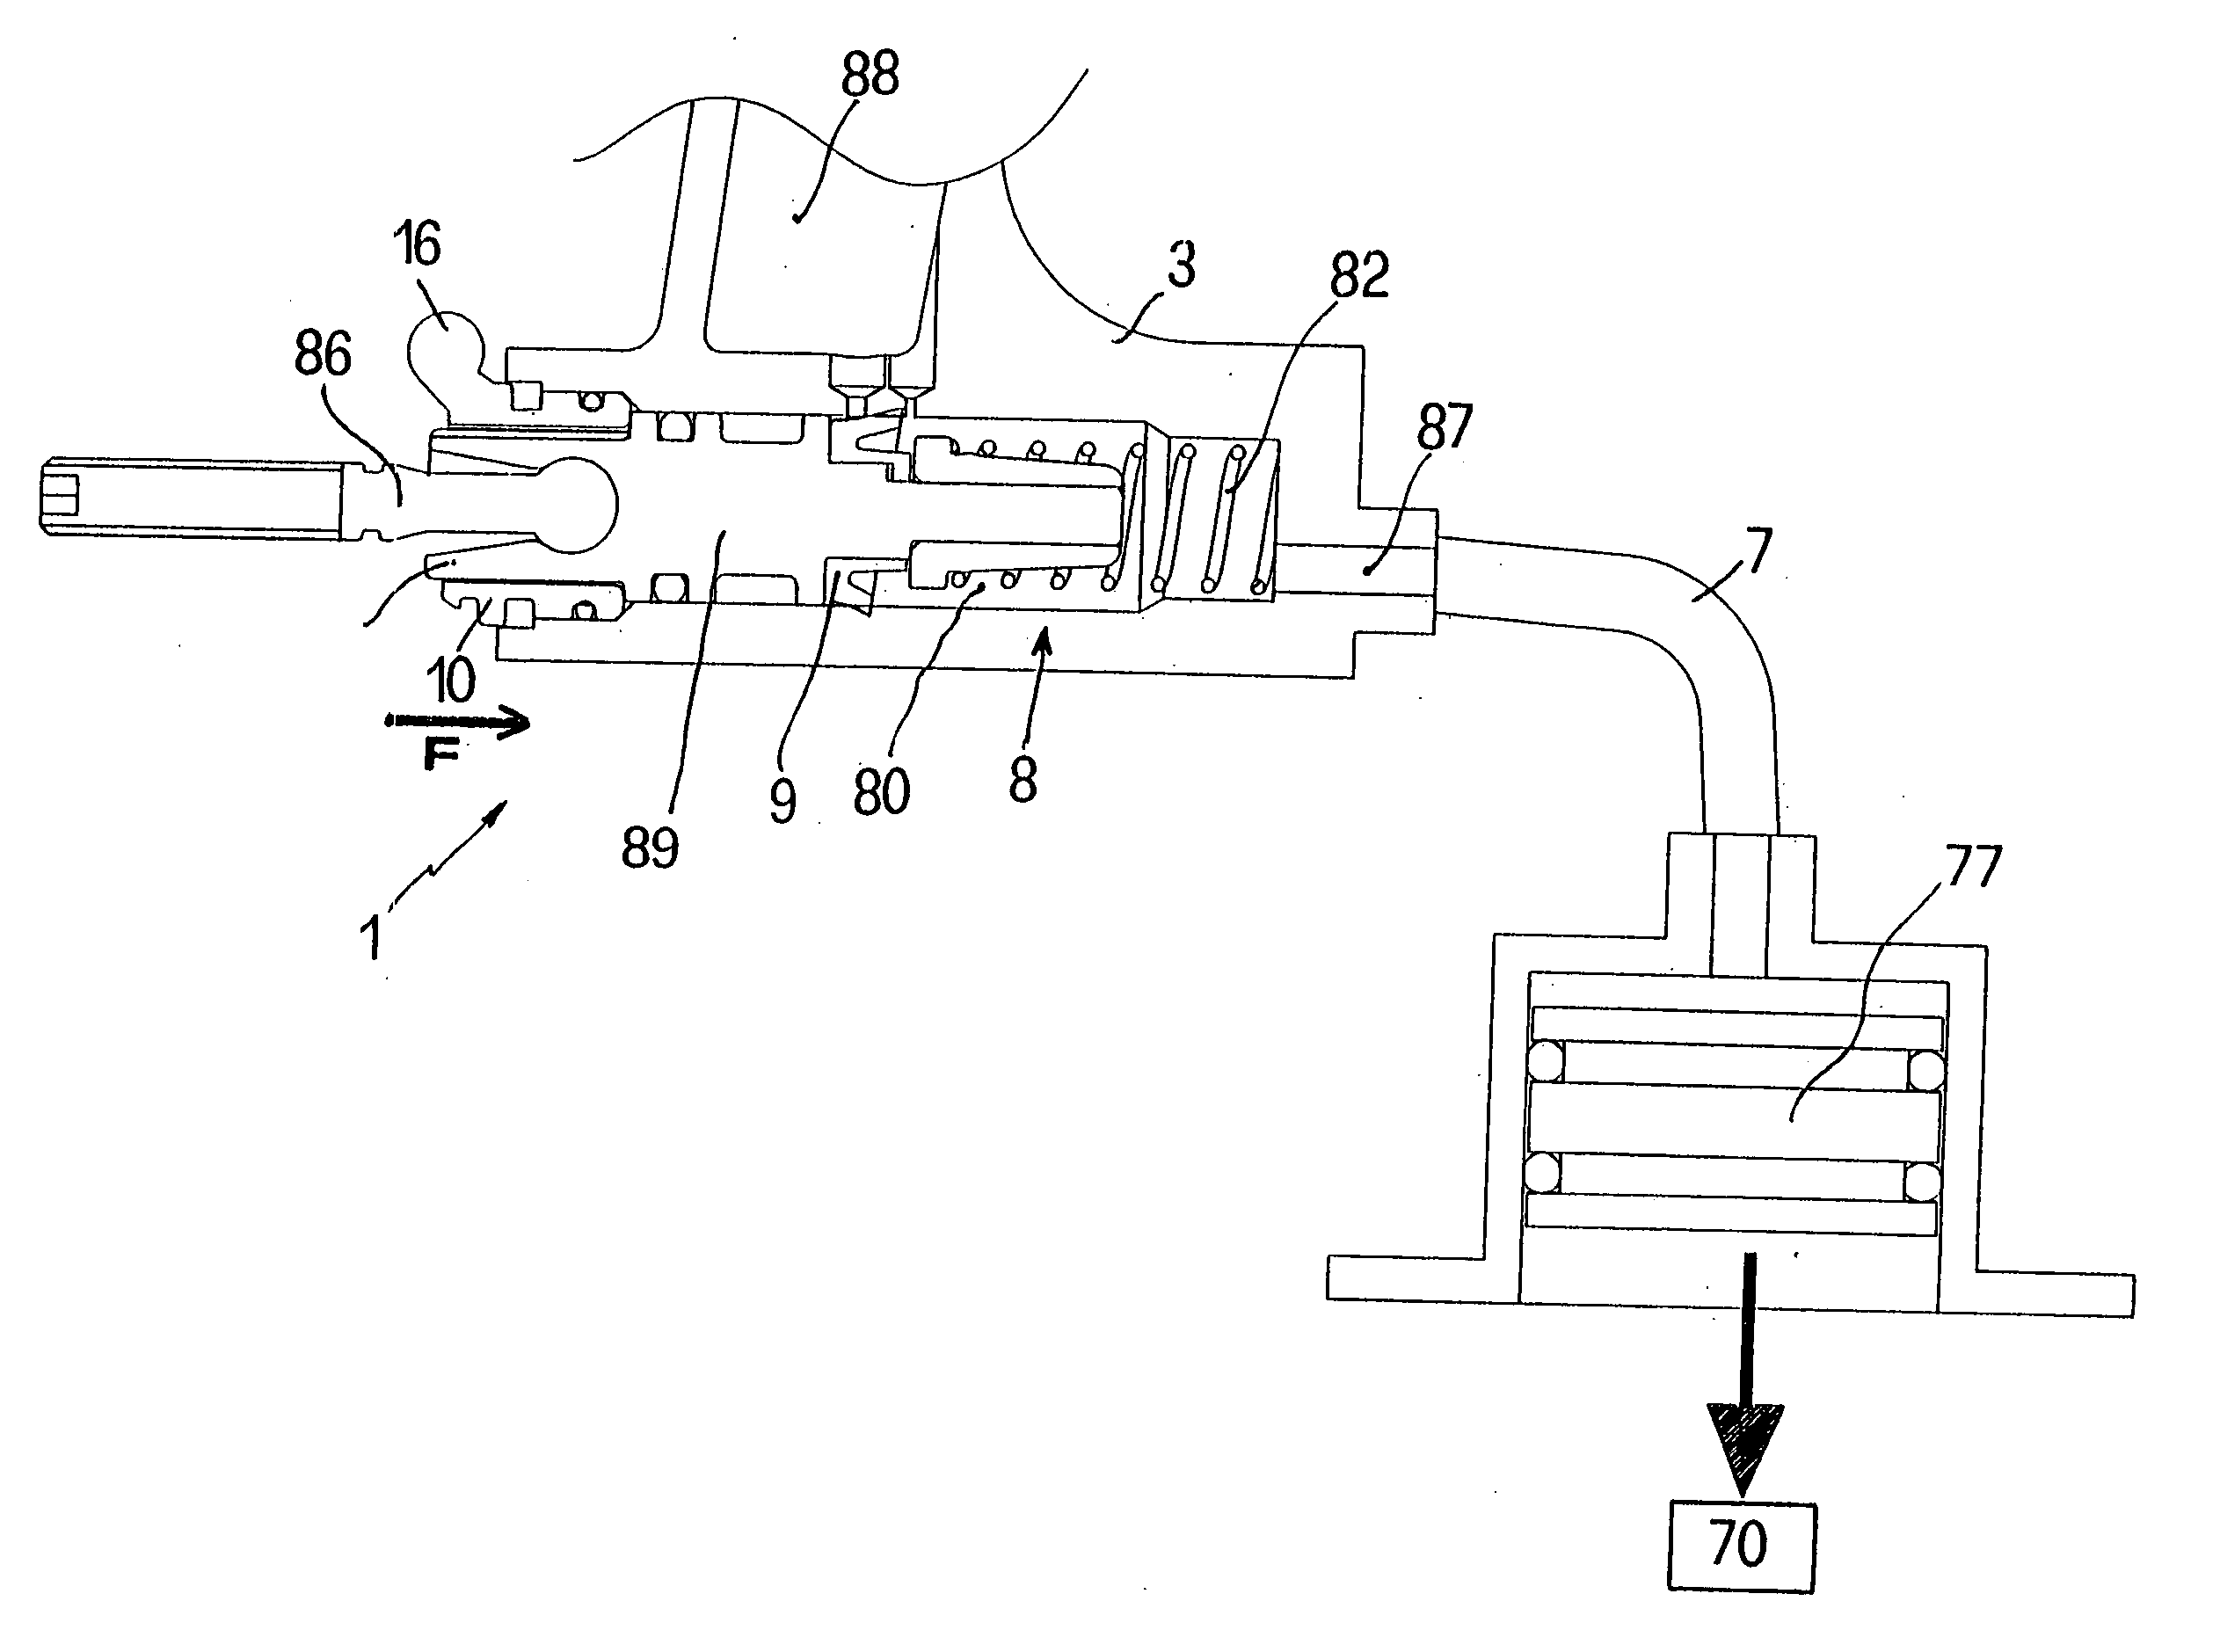 Apparatus for controlling a hydraulic circuit for clutches